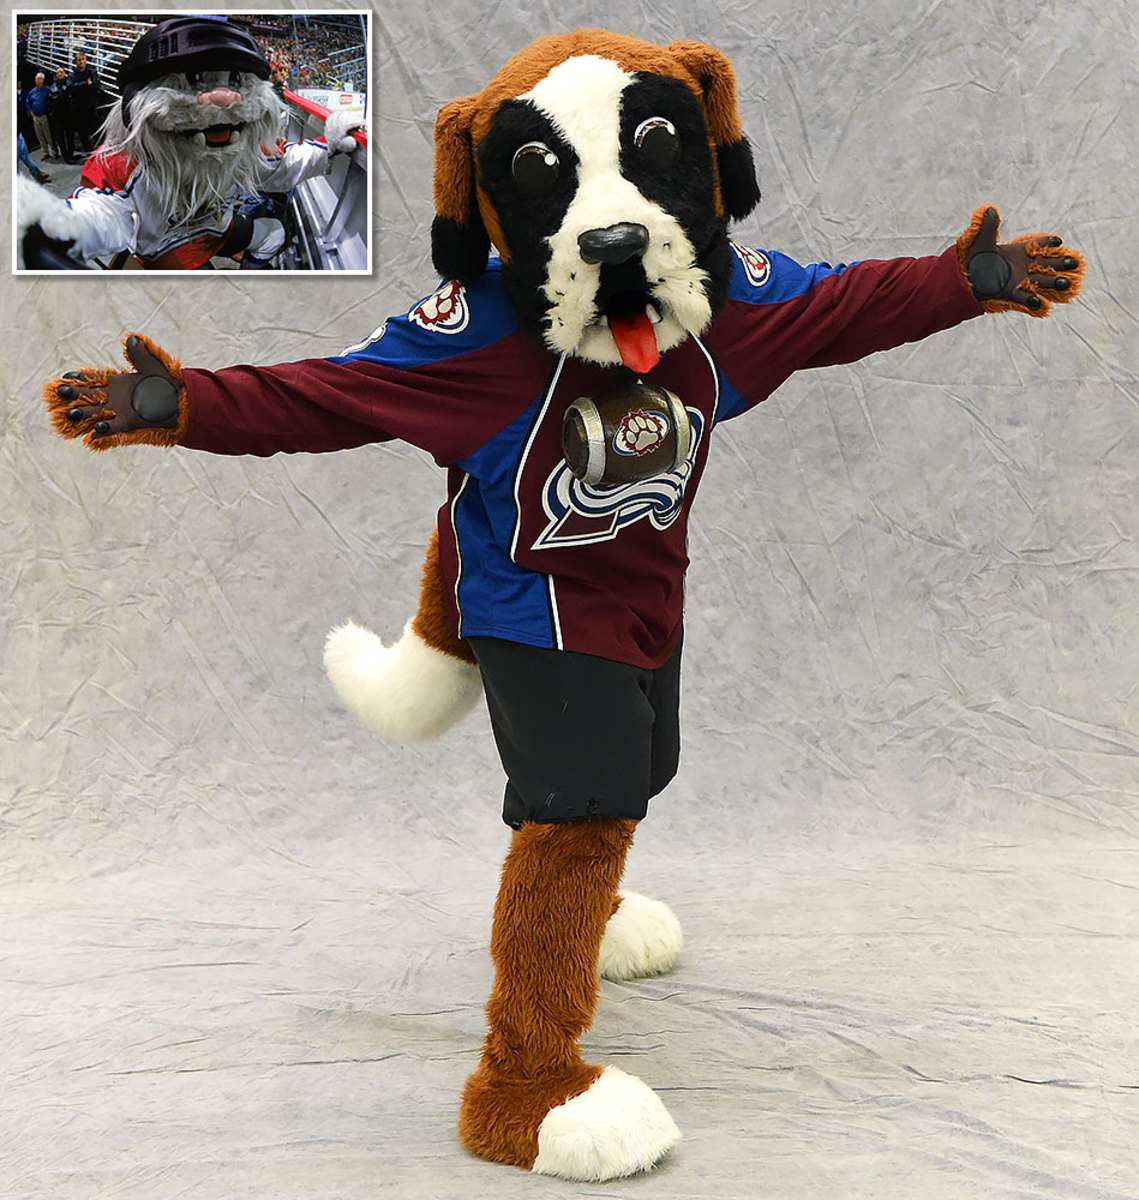 Rink)ing NHL mascots: the definitive list - The Times-Delphic